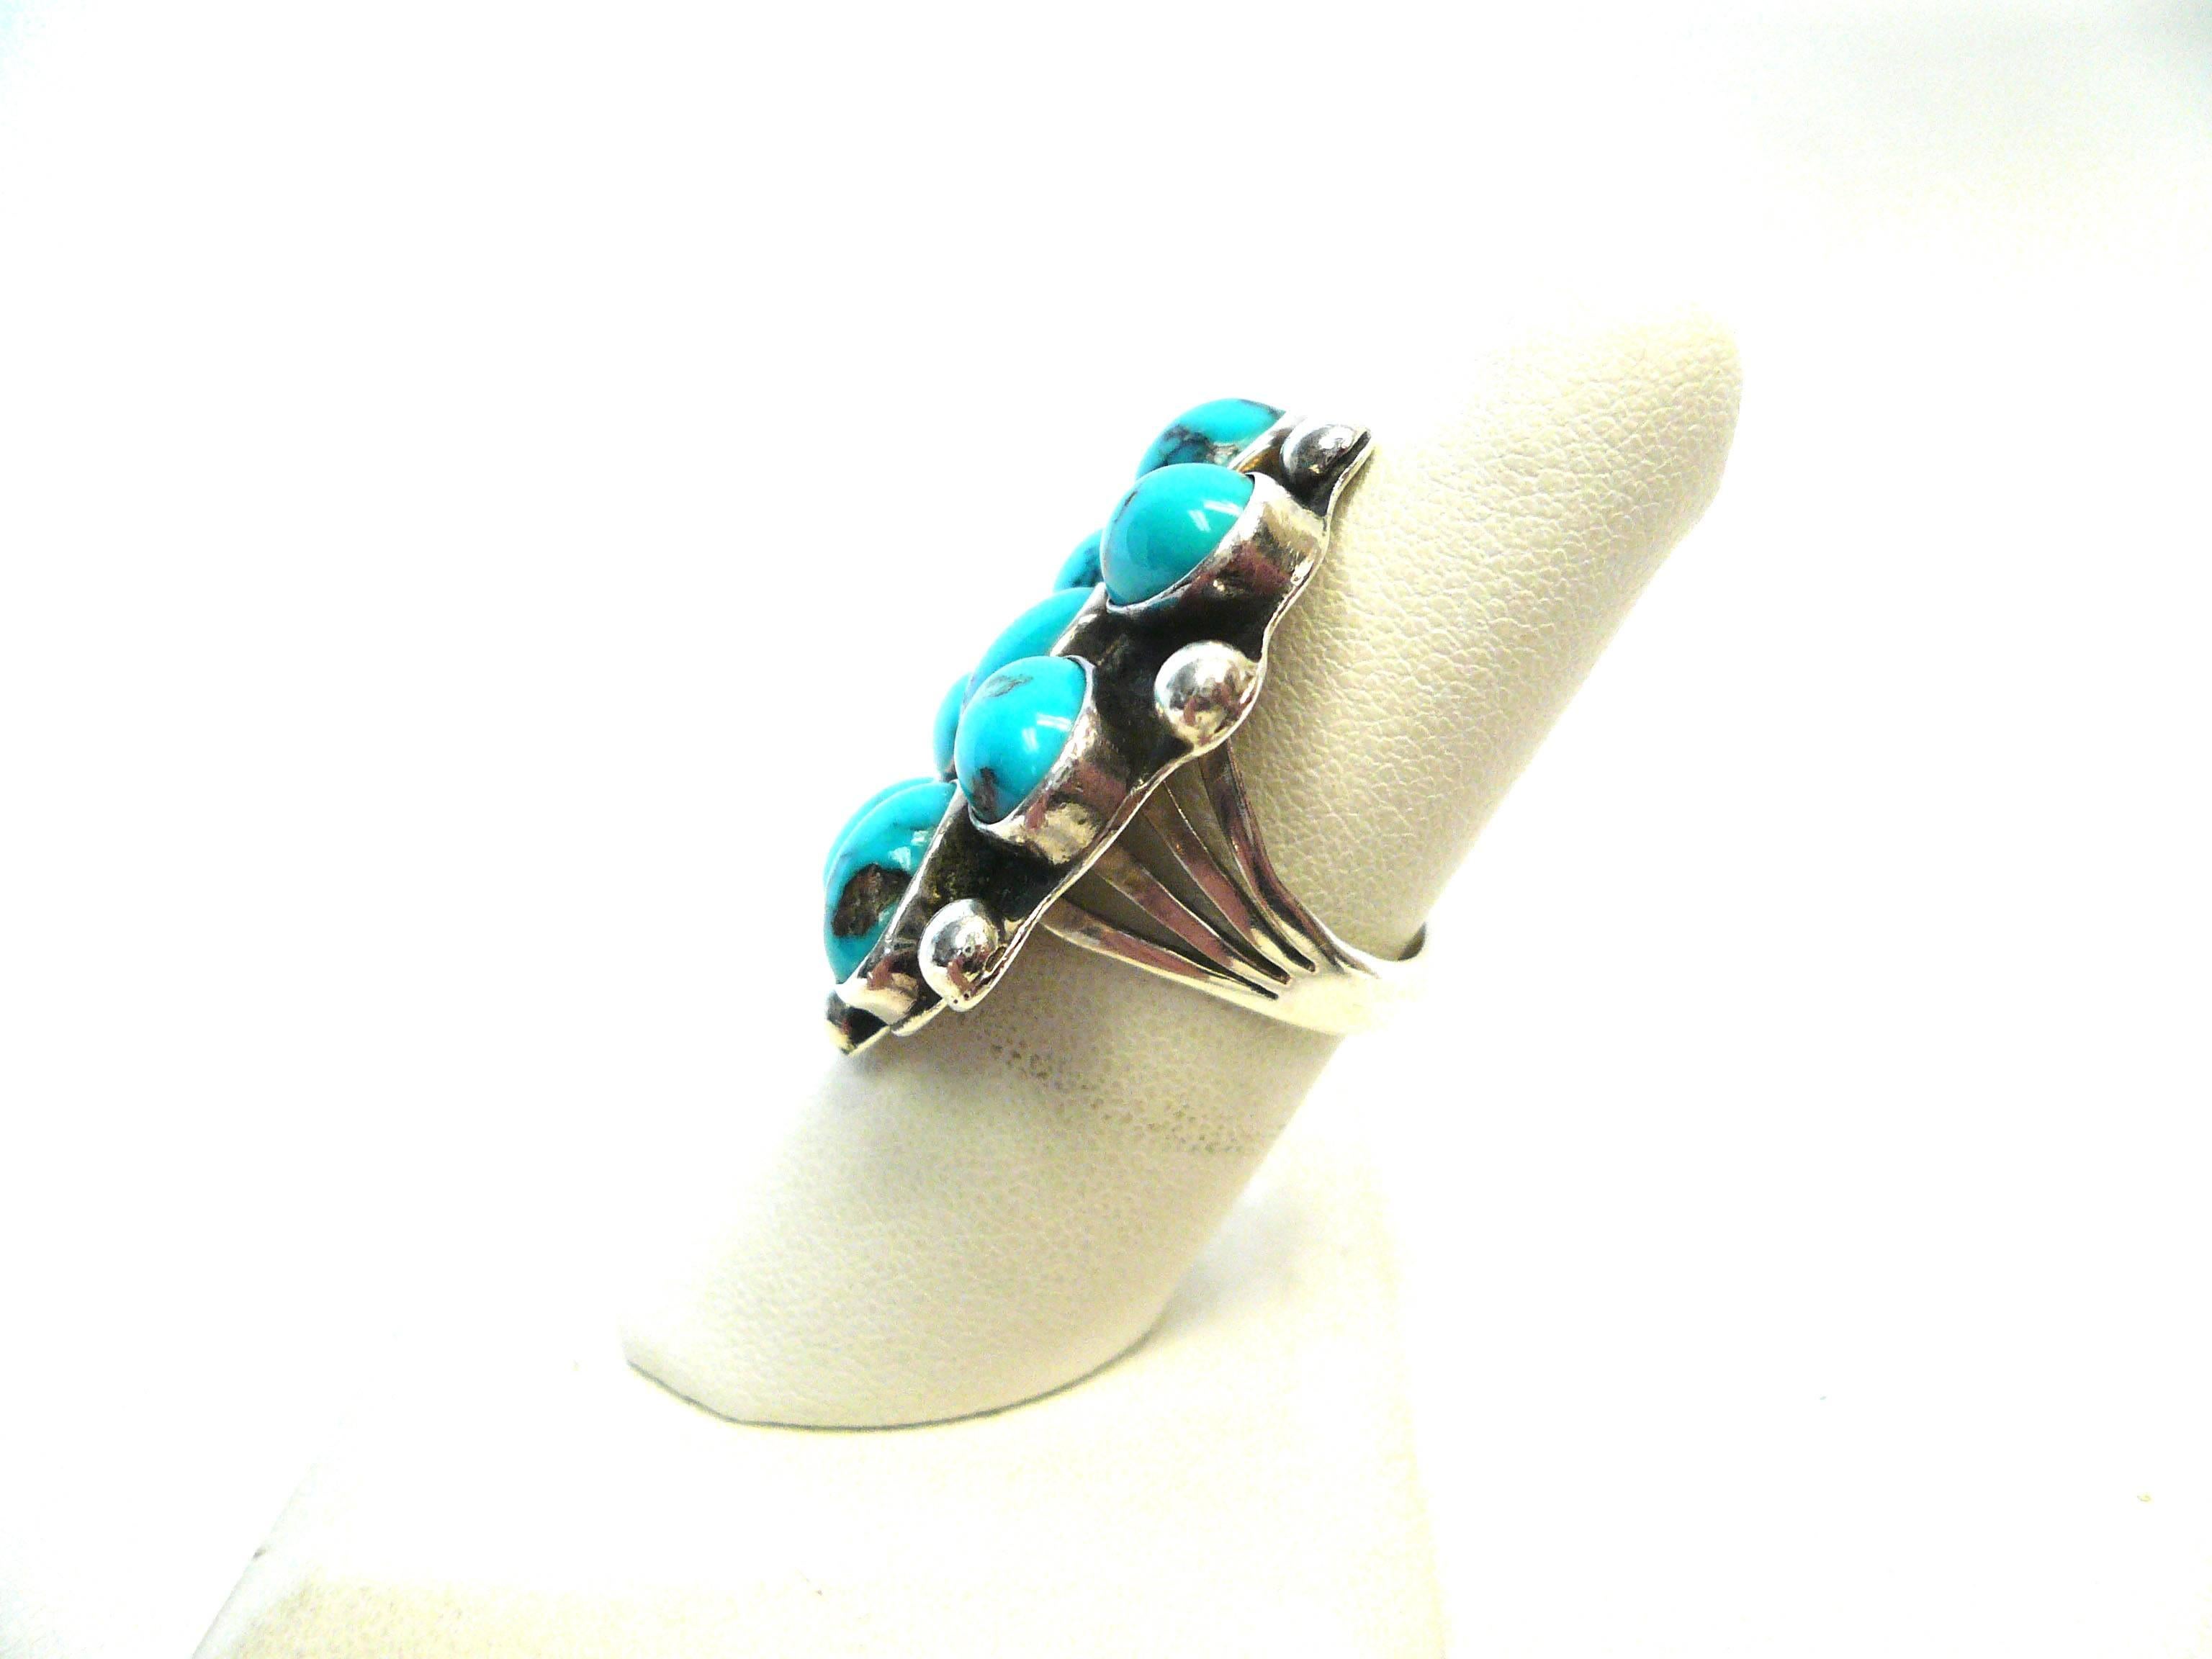 Lively ring is made of sterling silver and eight oval cabochon pieces of turquoise bezel set. Ring features rope details and a split shank design.
Ring is signed W. Yellowhorse. Yellowhorse is a third generation Navajo jewelry designer who's work is